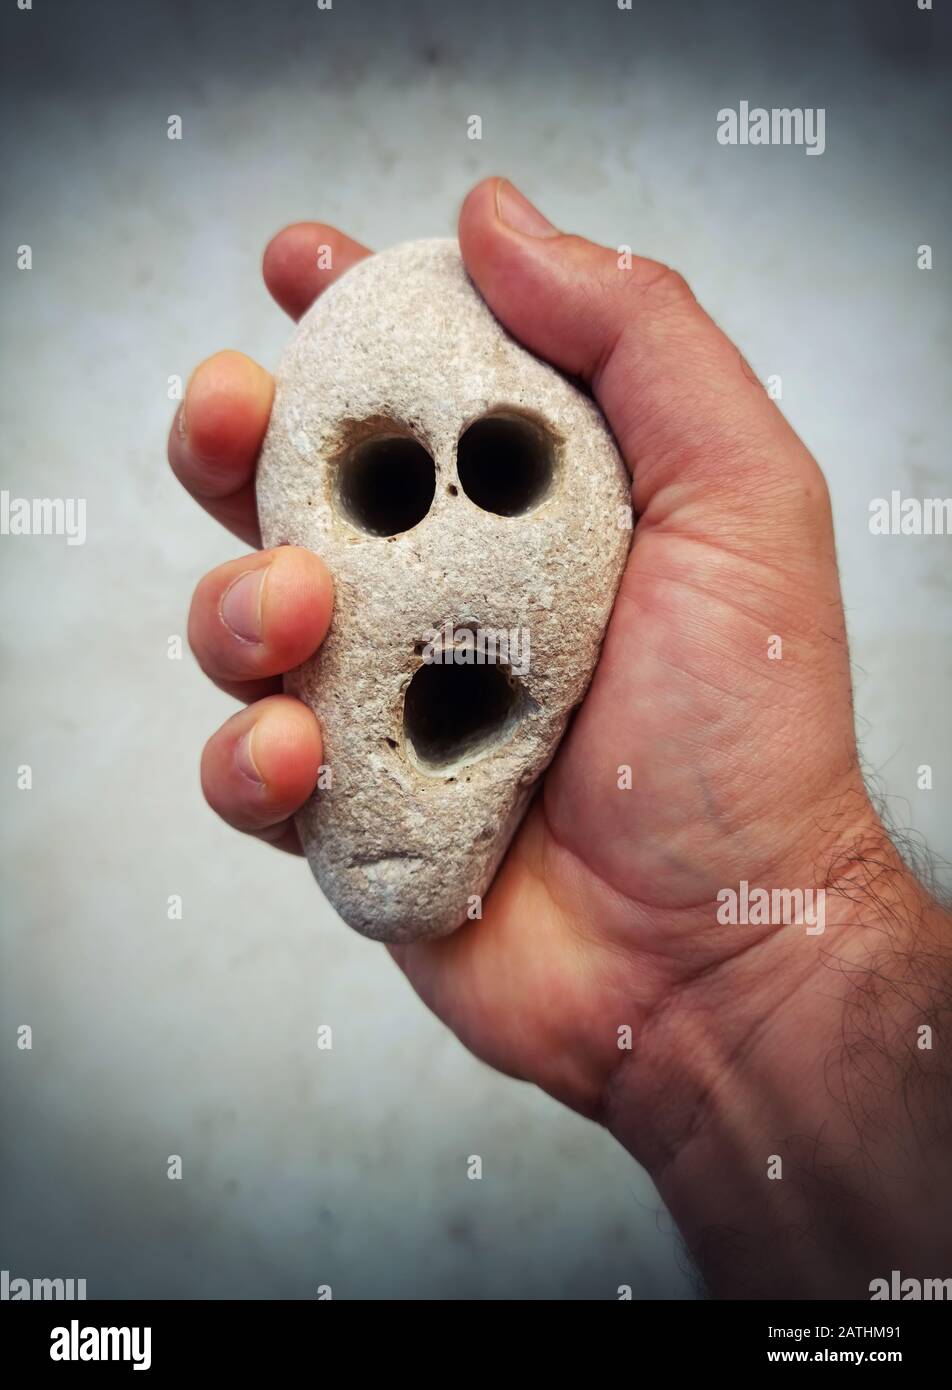 Man is holding a stone which look like a screaming face. Stock Photo